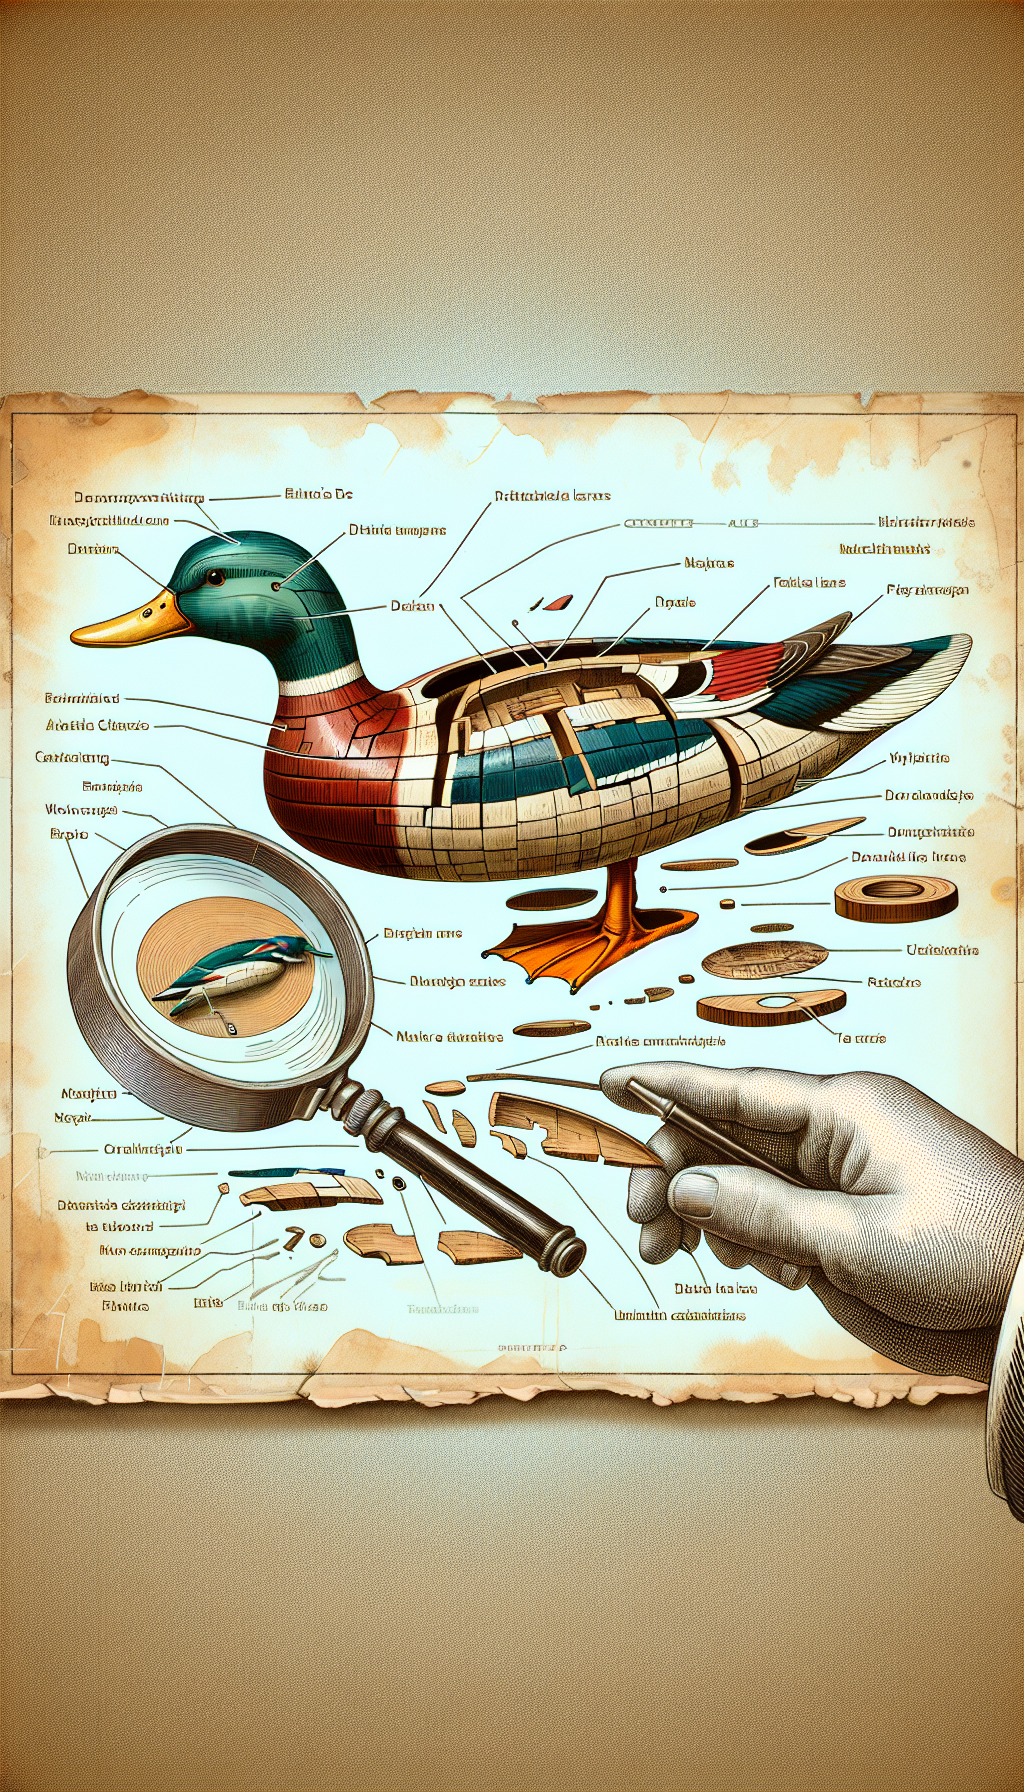 An illustration displays a magnifying glass hovering over a classic wooden duck decoy, which fragments into an exploded view showing layers of historic paint, maker's marks, and weathering patterns, each labeled with identifying characteristics. This vividly combines line art for the decoy details with a watercolor background exuding an antique vibe, embodying the fusion of art and detective work in identification.